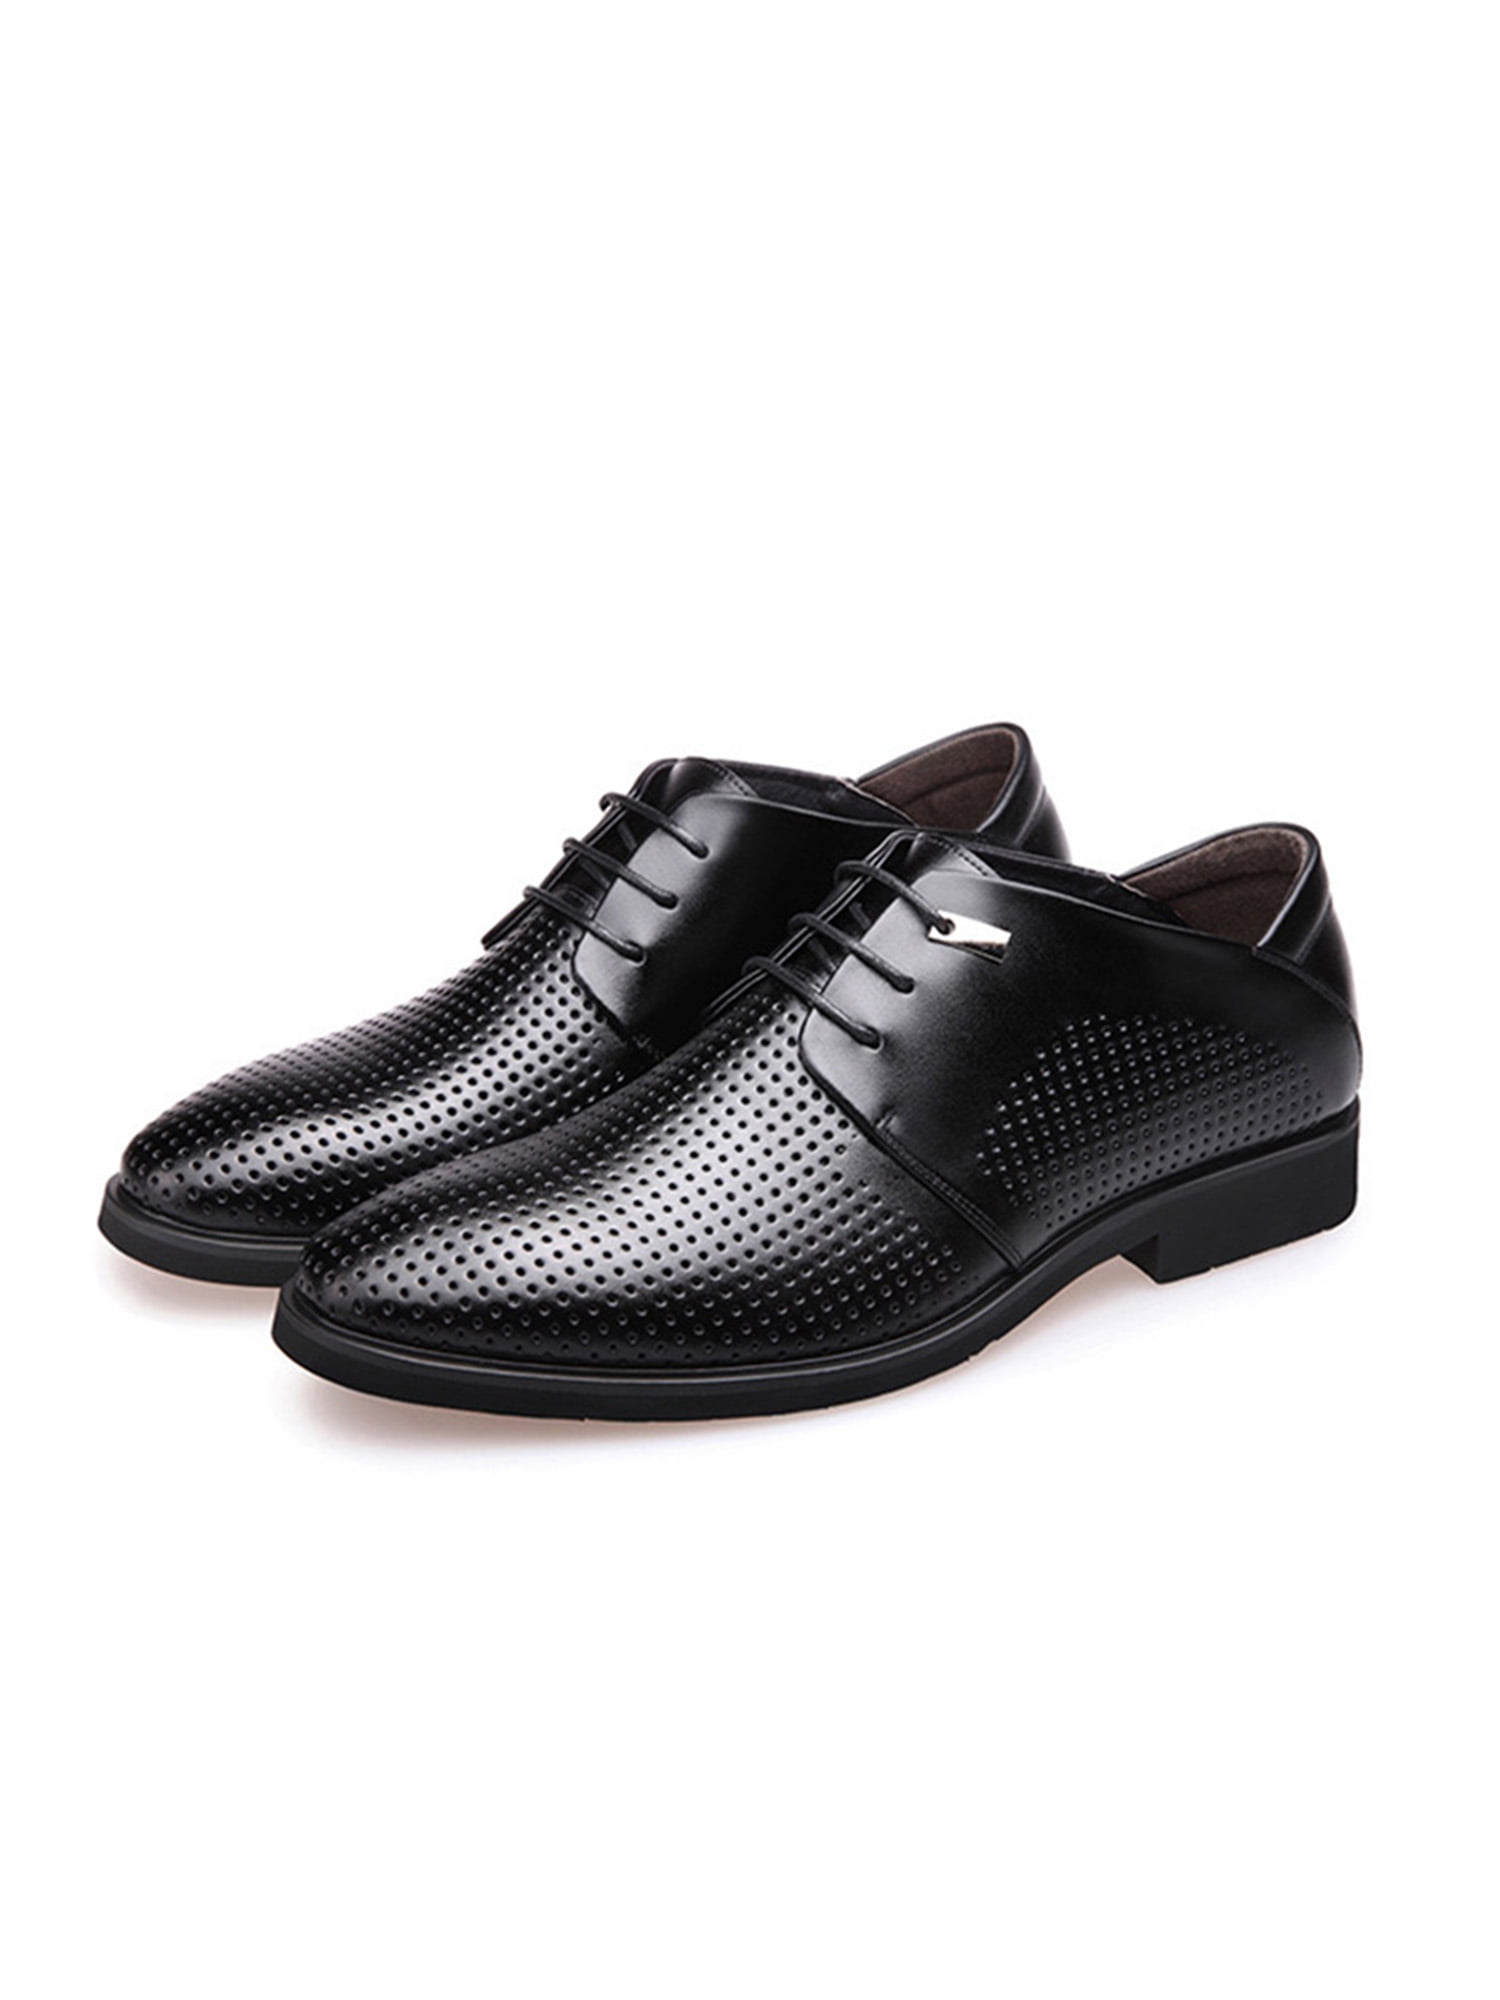 Oxford Shoe for Men Pointed Toe Chunky Lace up Breathable Stylish Shoes 